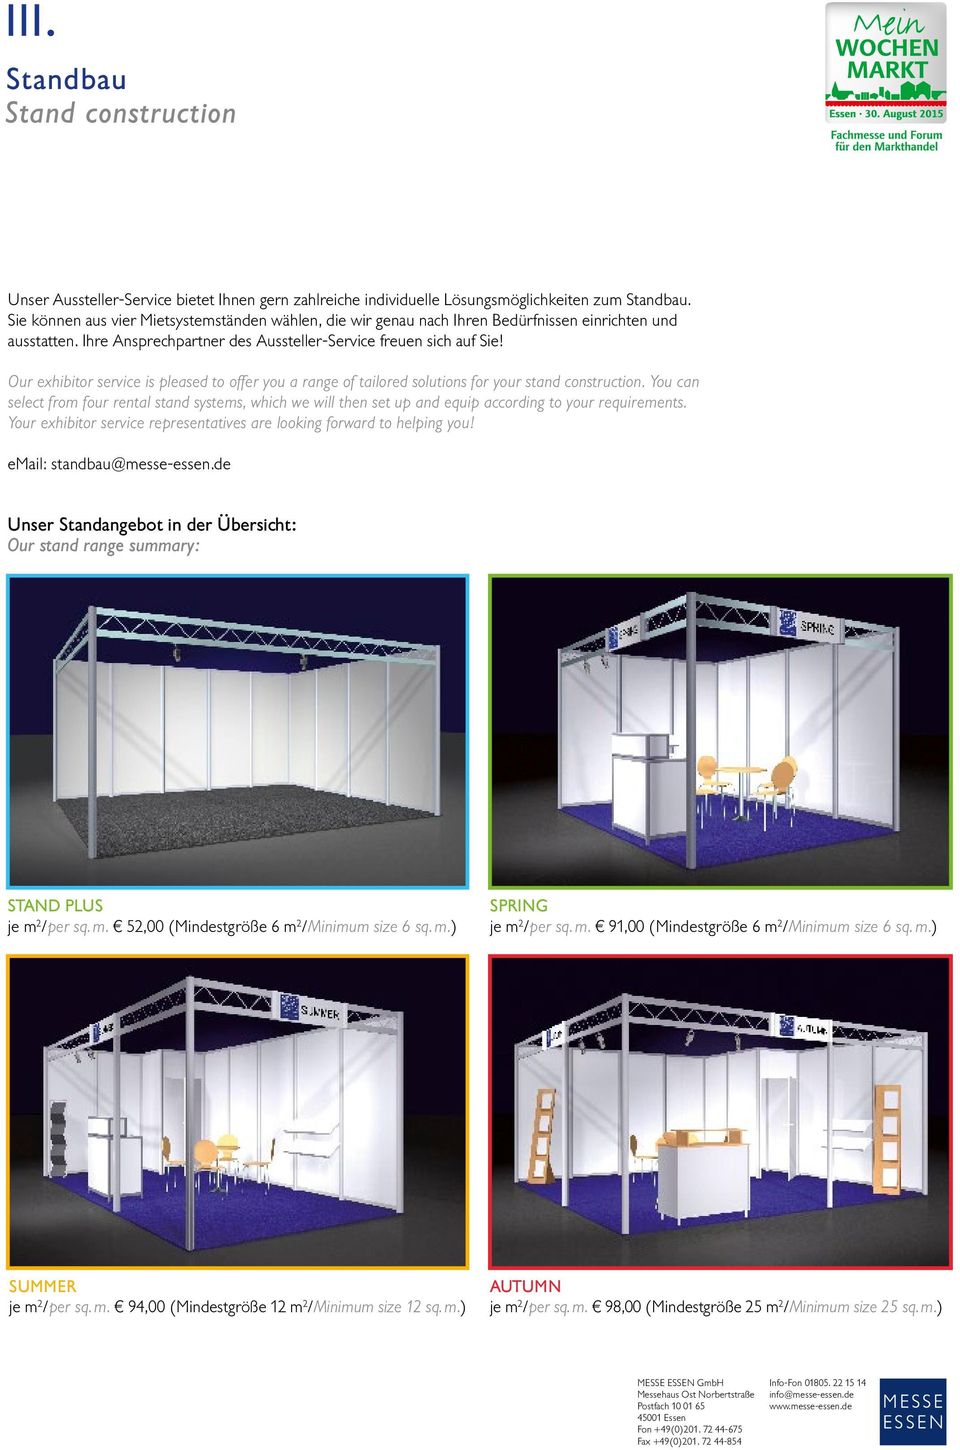 Our exhibitor service is pleased to offer you a range of tailored solutions for your stand construction.